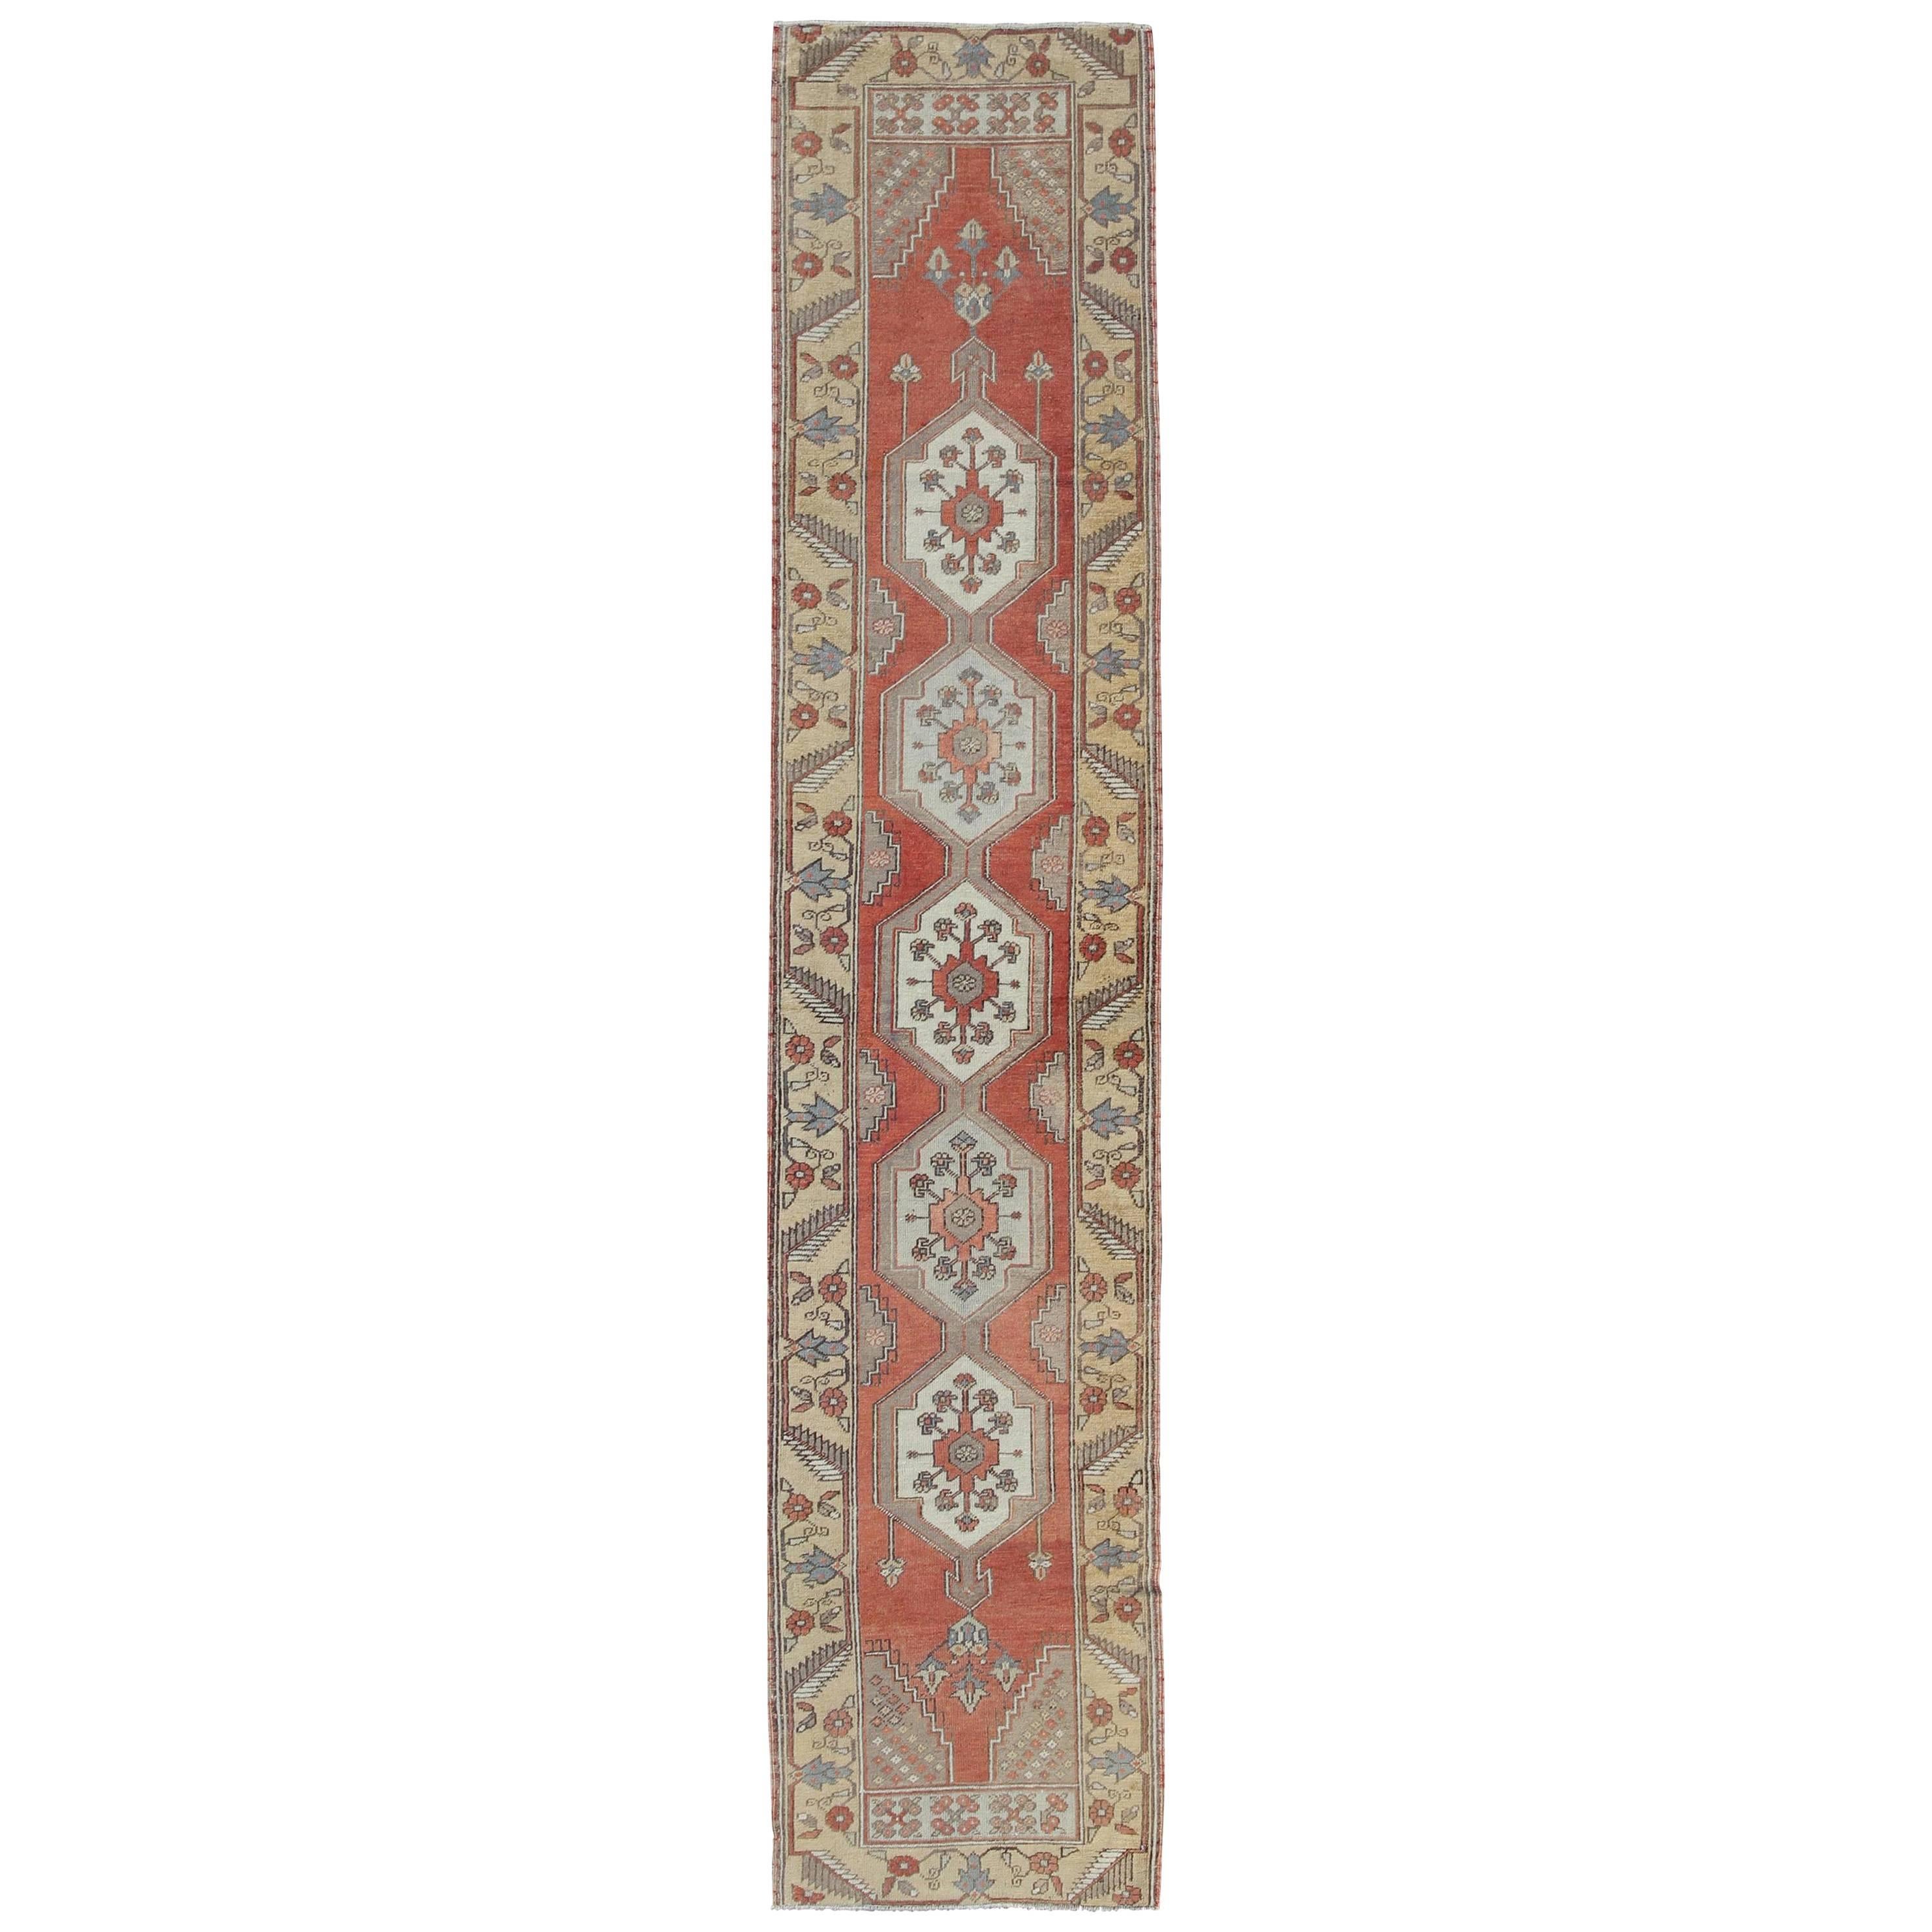 Sub-Geometric Tribal Vintage Oushak Runner from Early 20th Century Turkey For Sale